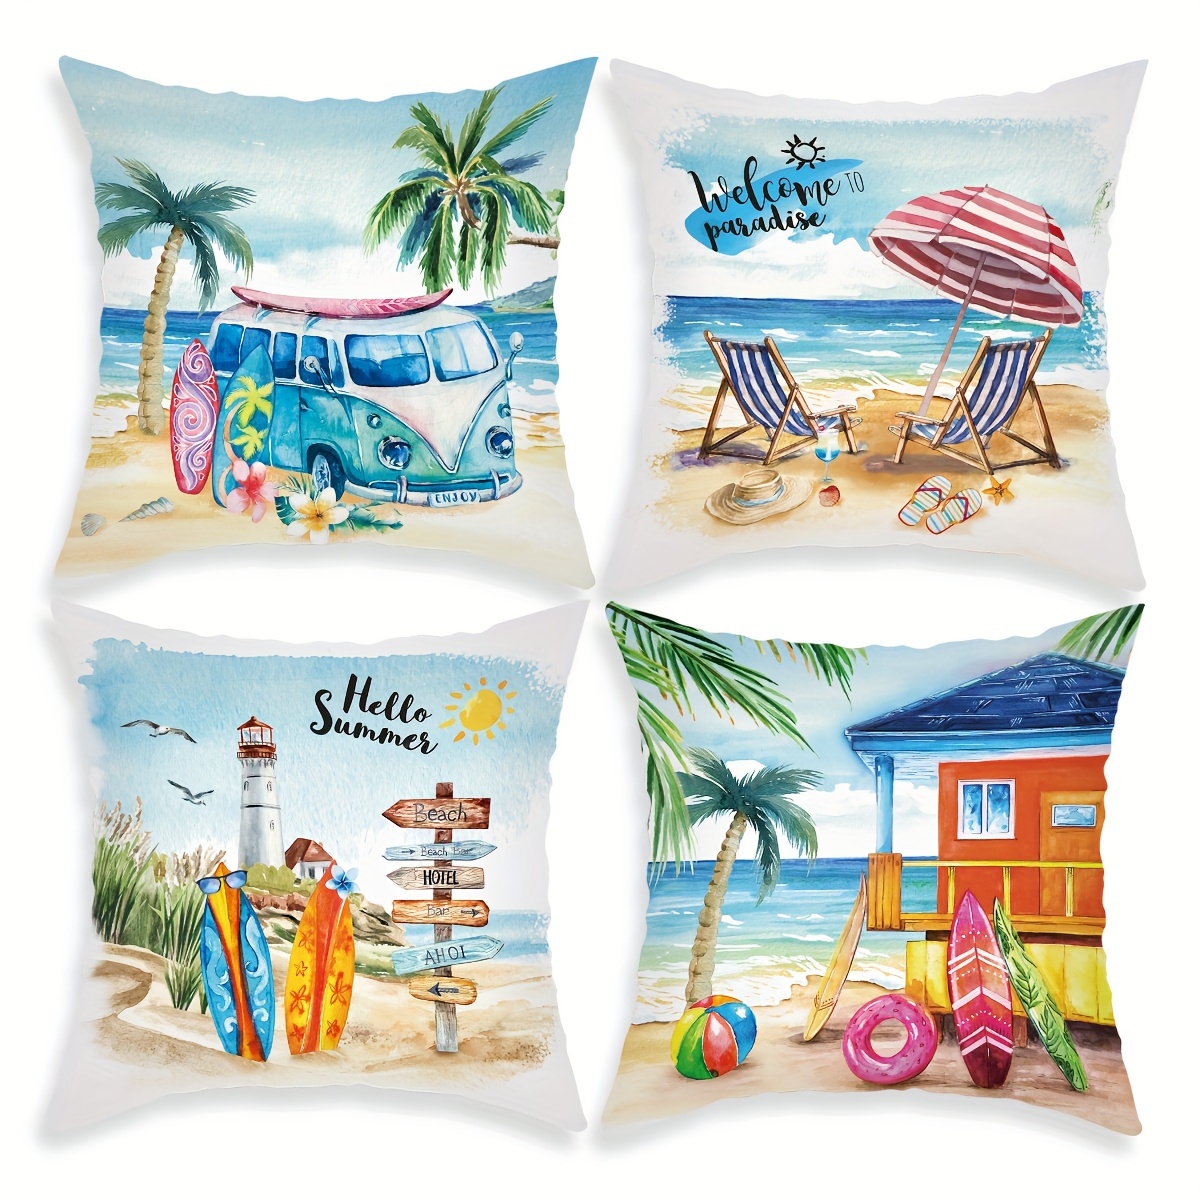 

4pcs/1pc Summer Beach Coconut Tree Surfboard Vacation Style Printed Throw Pillow Case, Home Decoration Sofa Cushion Throw Pillow Pillow Cover 18"x18